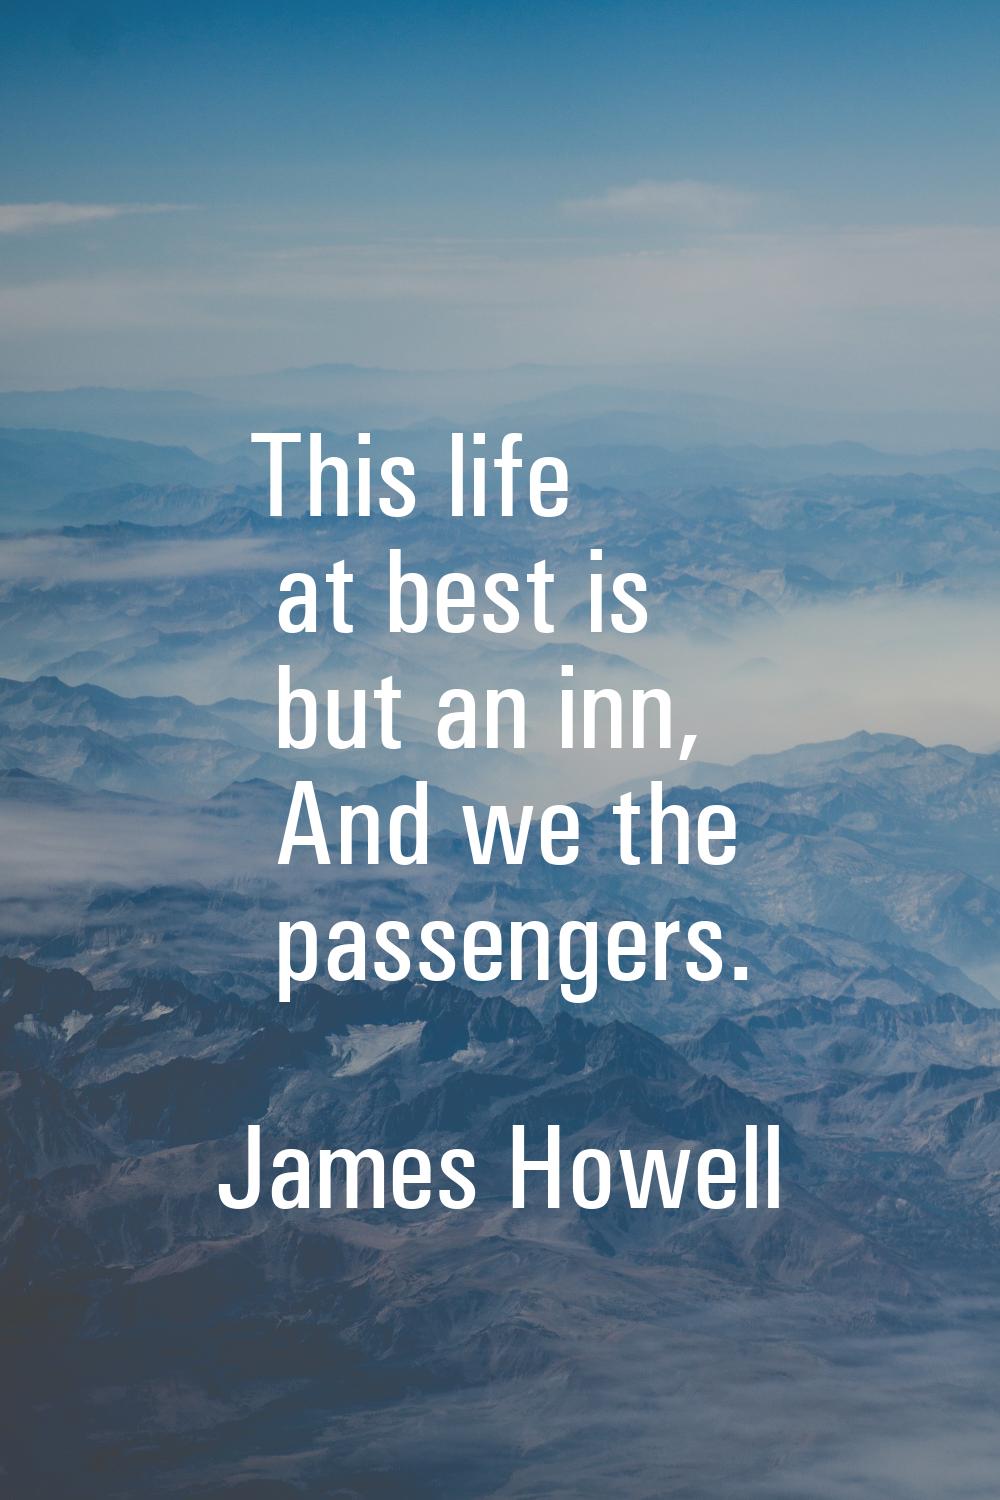 This life at best is but an inn, And we the passengers.